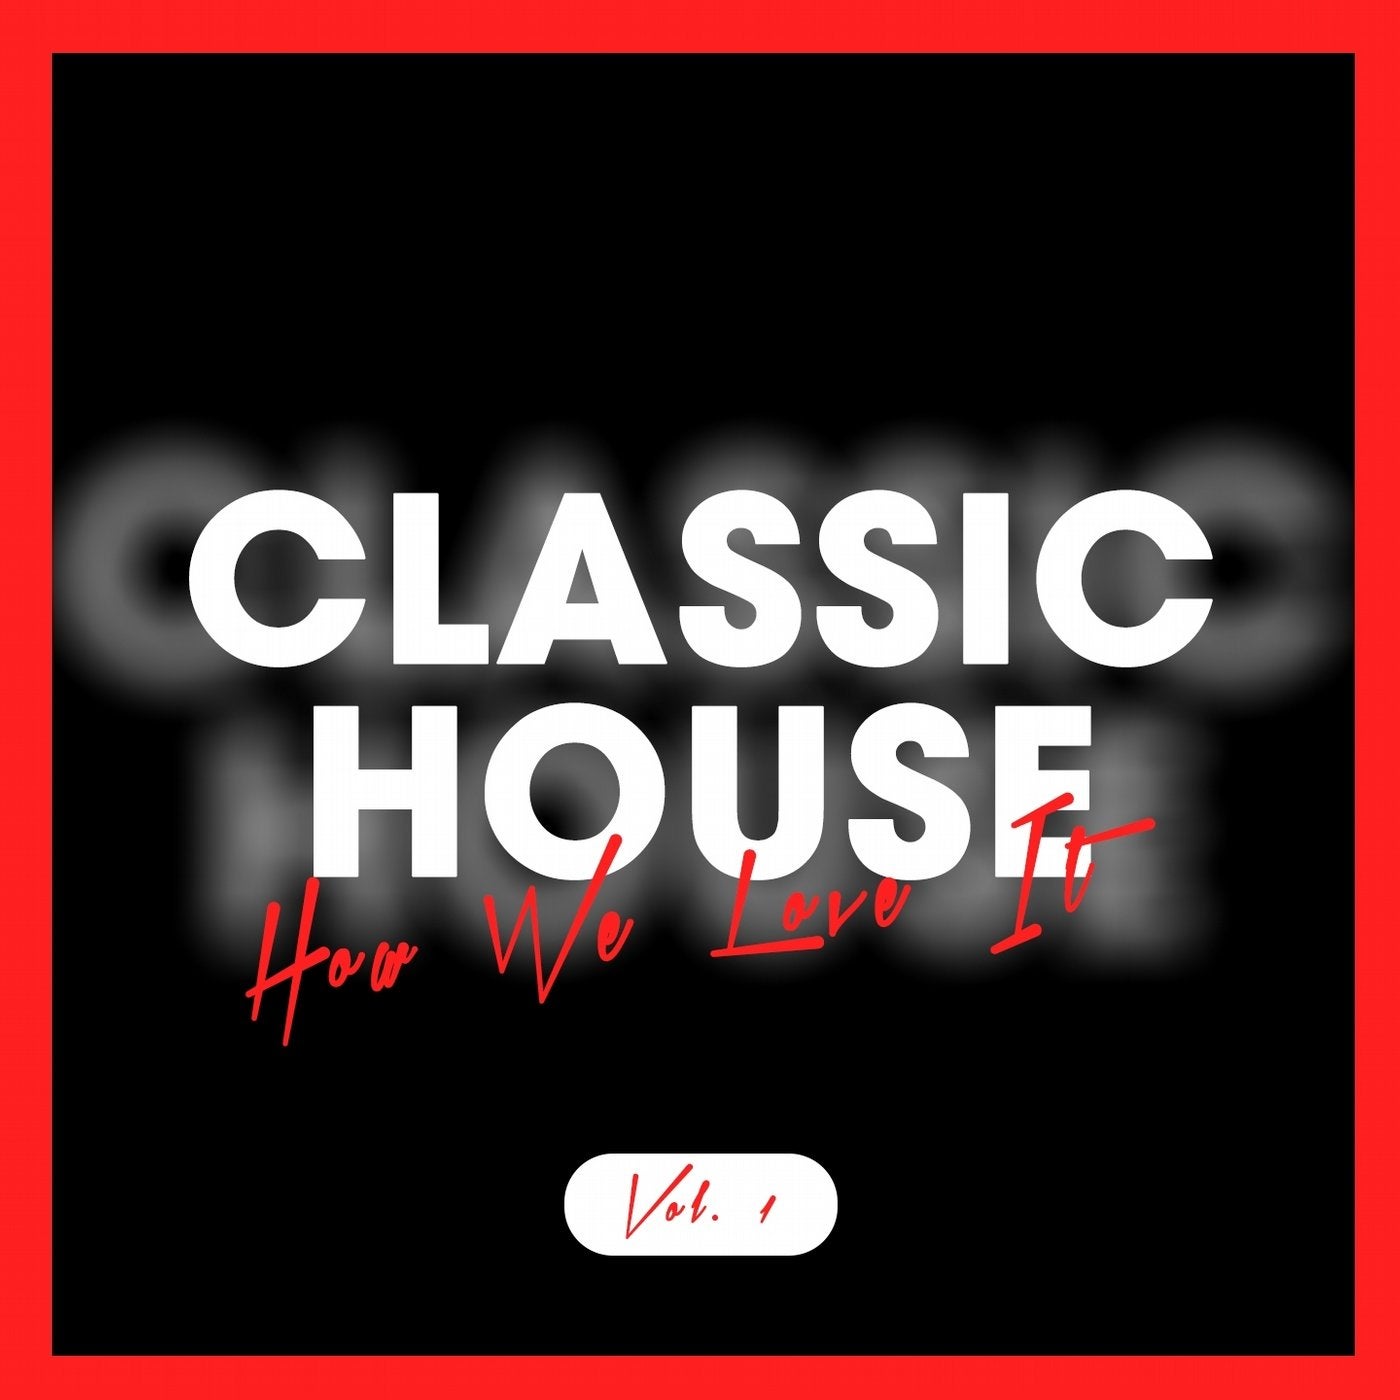 Classic House - How We Love It, Vol. 1